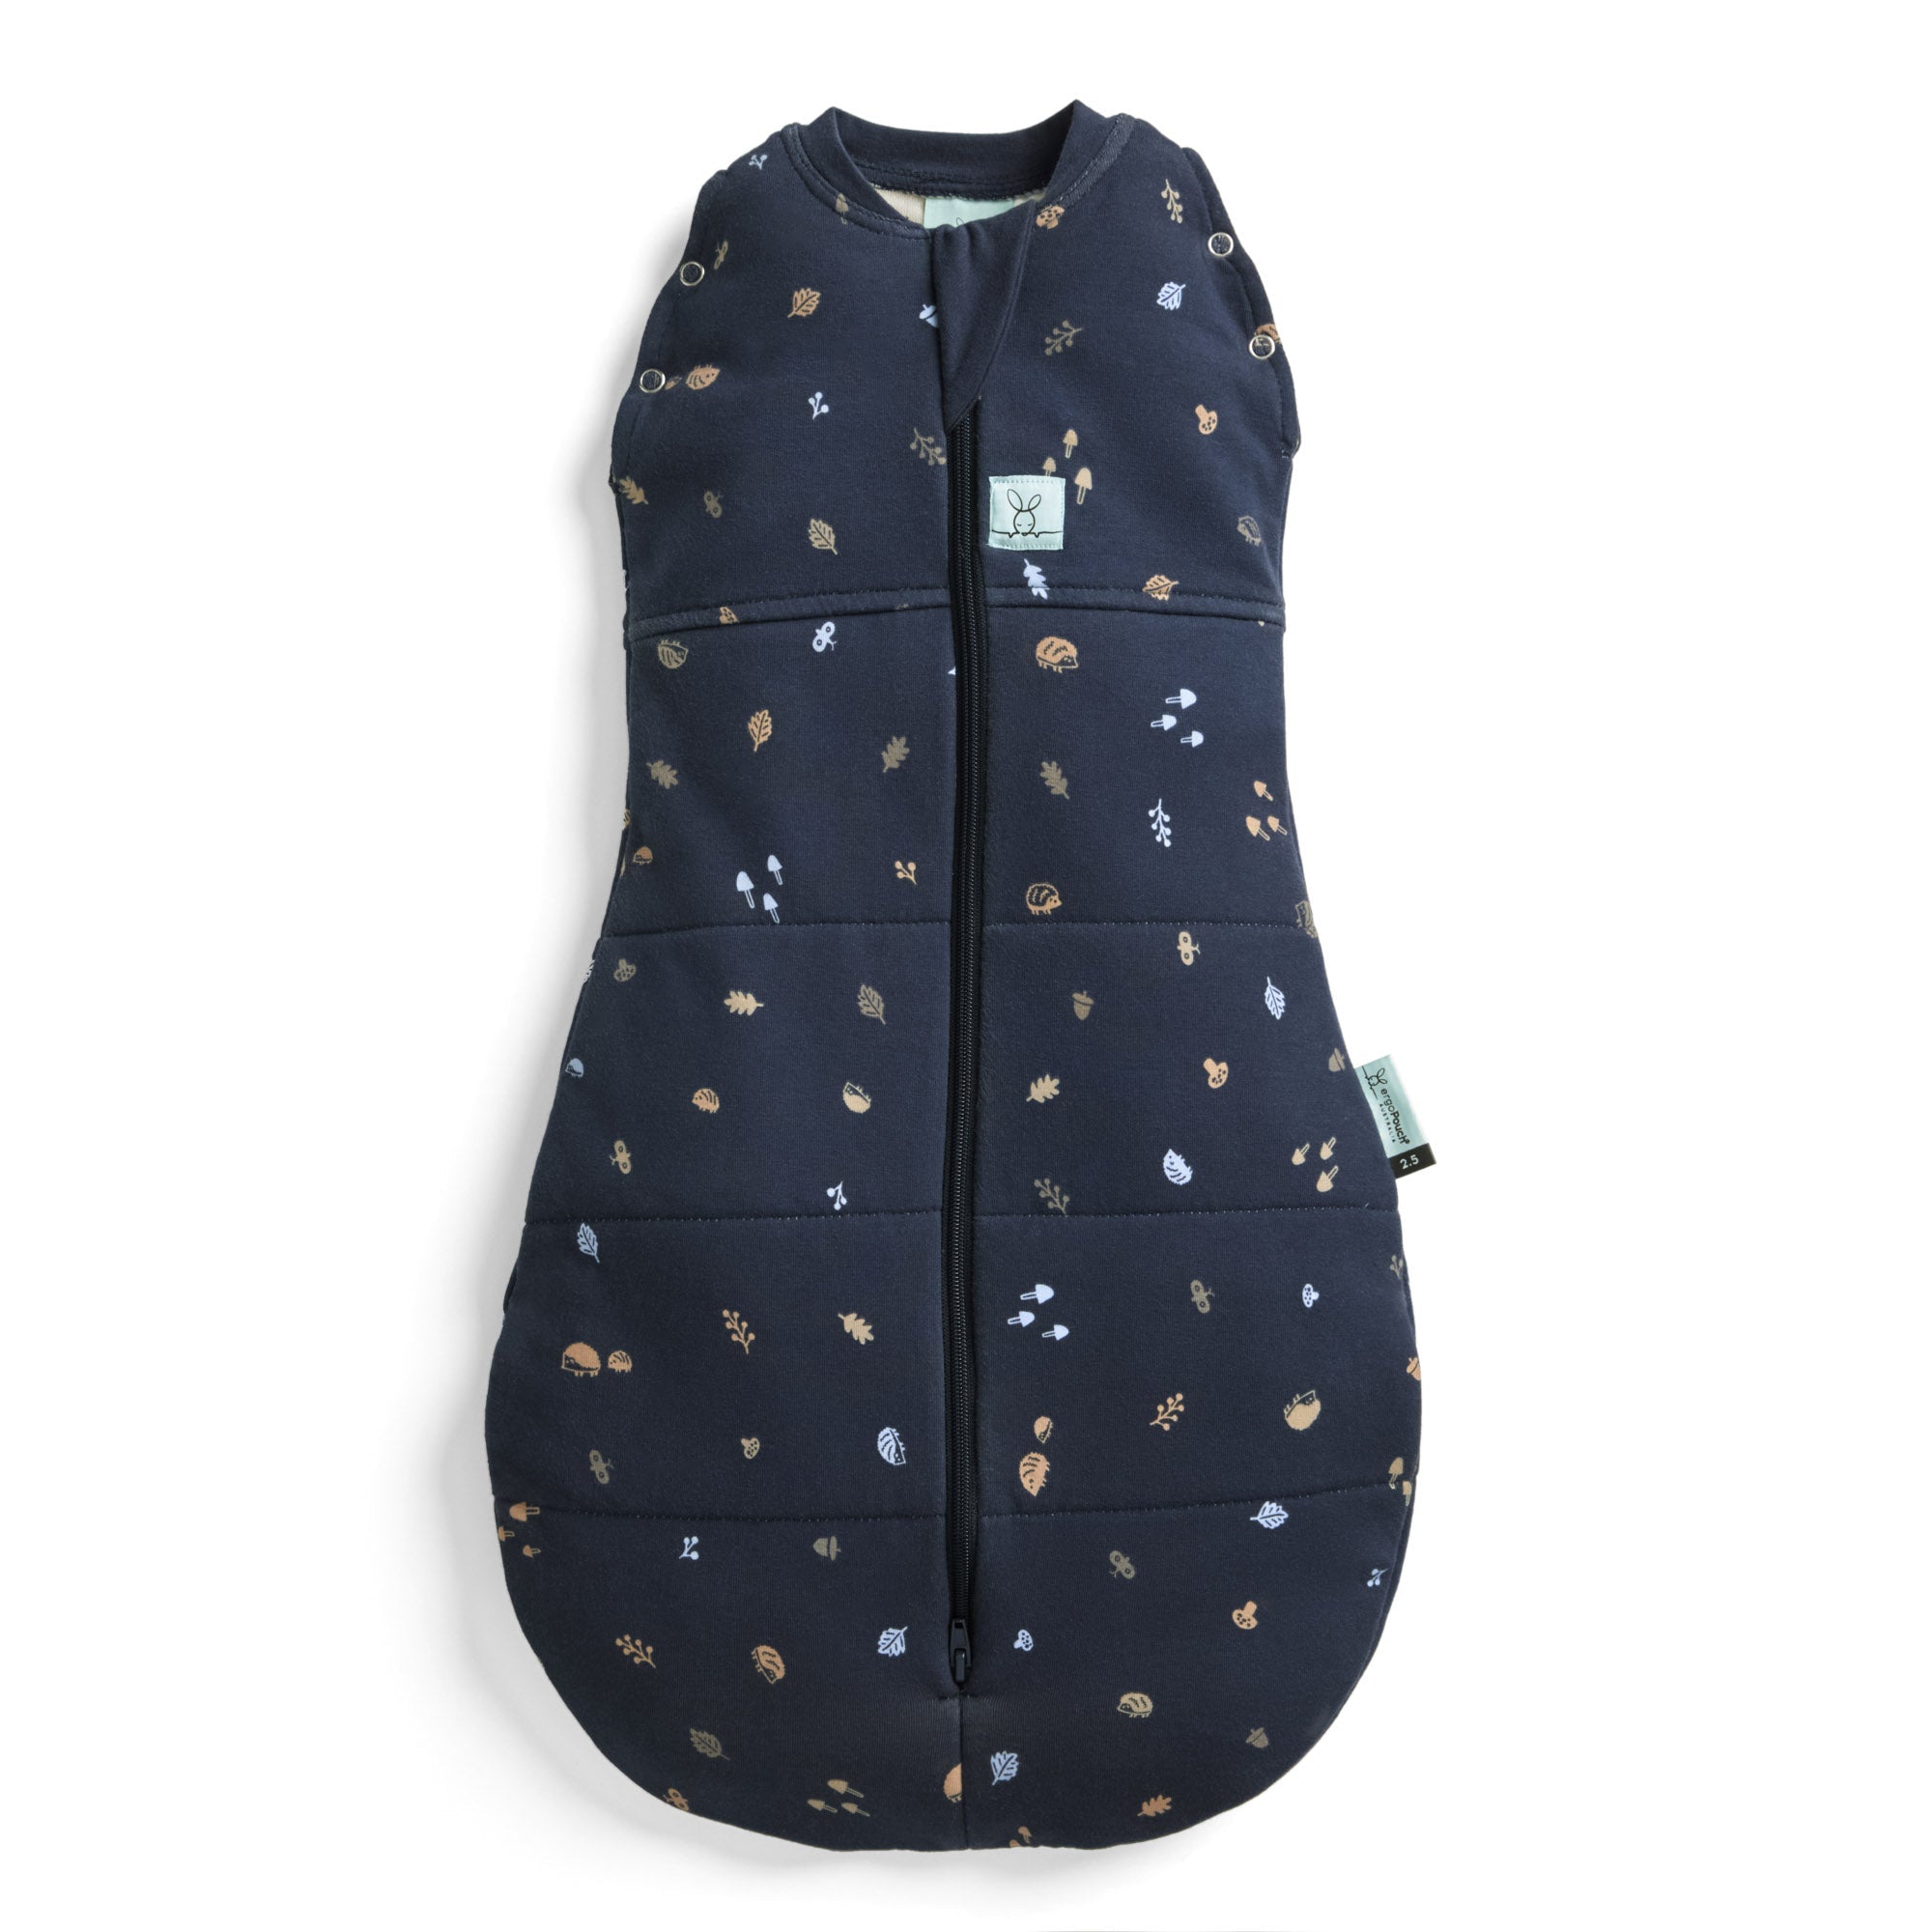 Cocoon Swaddle Bag 2.5 Tog For Baby By ergoPouch - Hedgehog